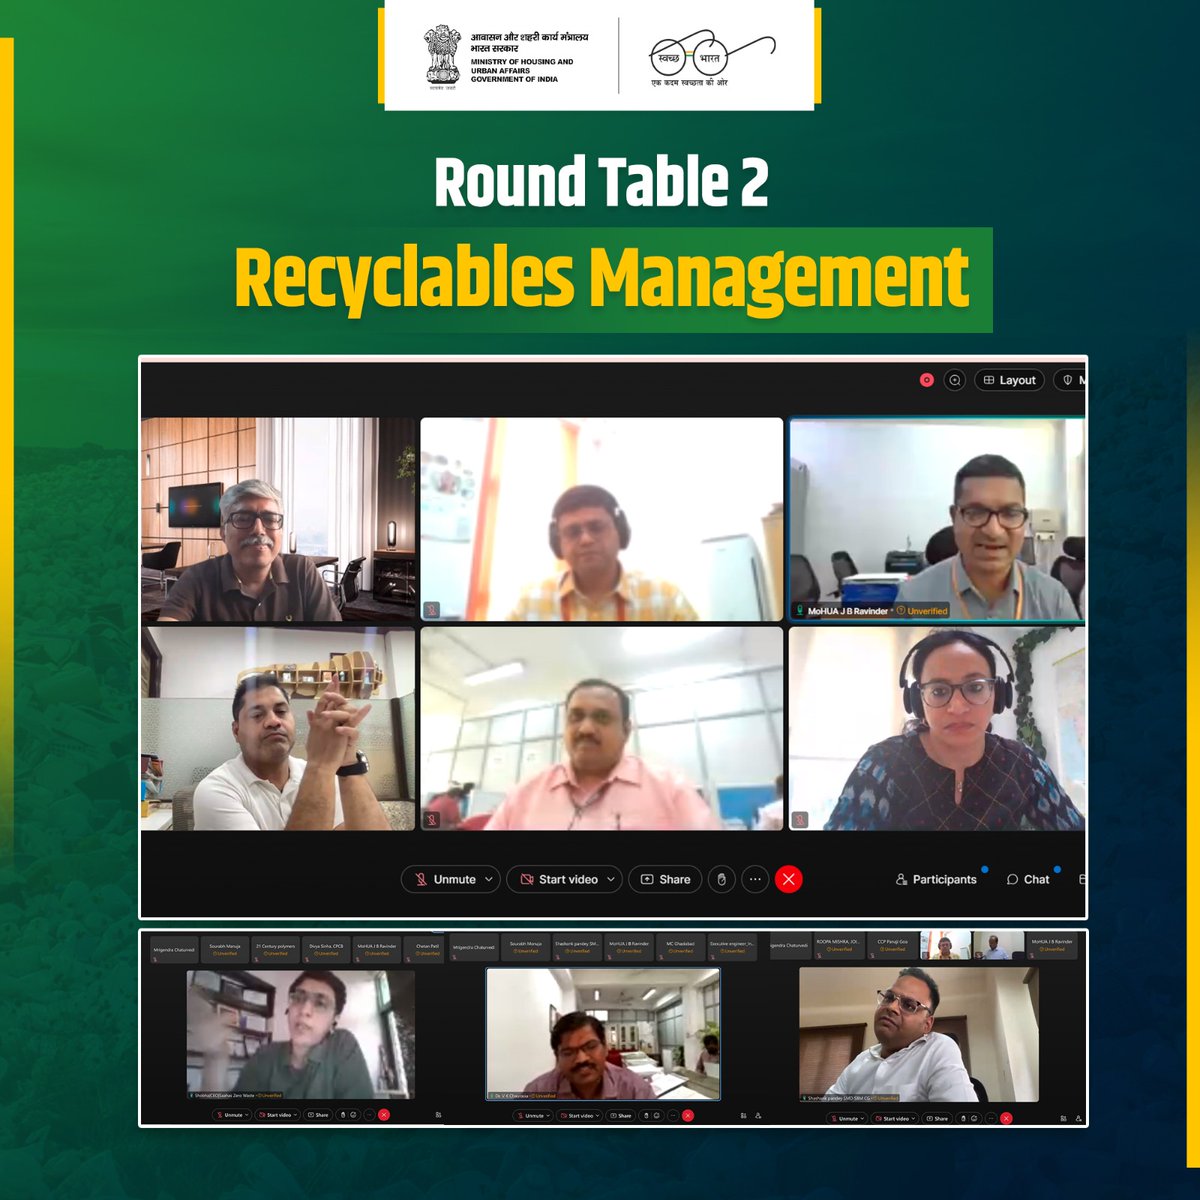 Today, Swachh Bharat Mission organized two Round Table discussions with practitioners and industry representatives to discuss collection and transportation of municipal solid waste and recyclables management for better waste management in India. #wastemanagement #sustainability